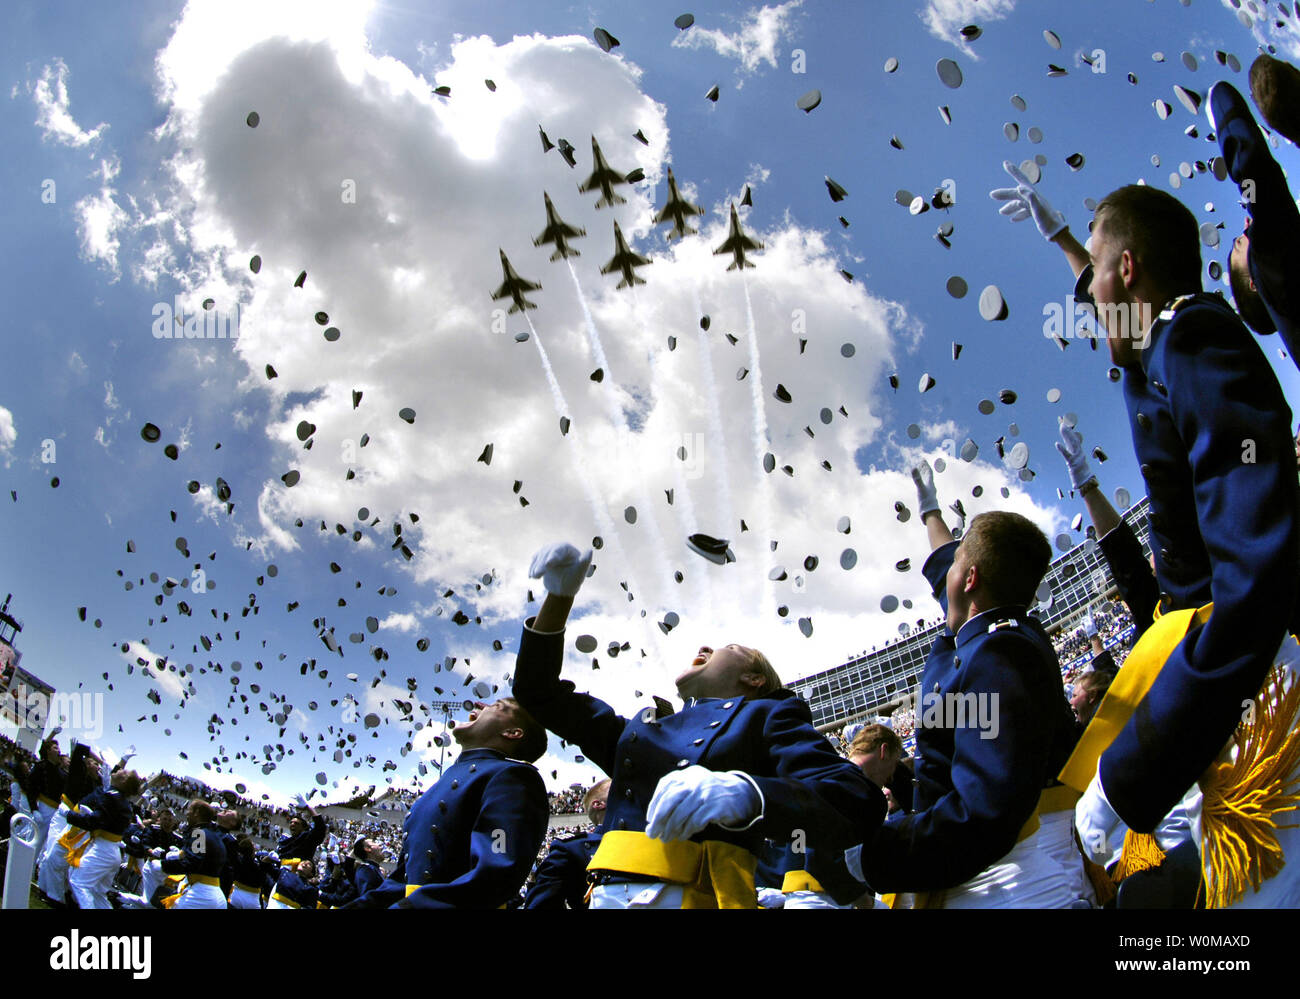 U.S. Air Force Academy graduates throw their hats in the air in celebration as the Thunderbirds fly overhead signaling the end of the Air Force Academy graduation ceremony in Colorado Springs, Colorado on May 30, 2007.  Secretary of Defense Robert M. Gates delivered the commencement address to the 976-member graduating class.  (UPI Photo/Cherie A. Thurlby/Dept. of Defense) Stock Photo